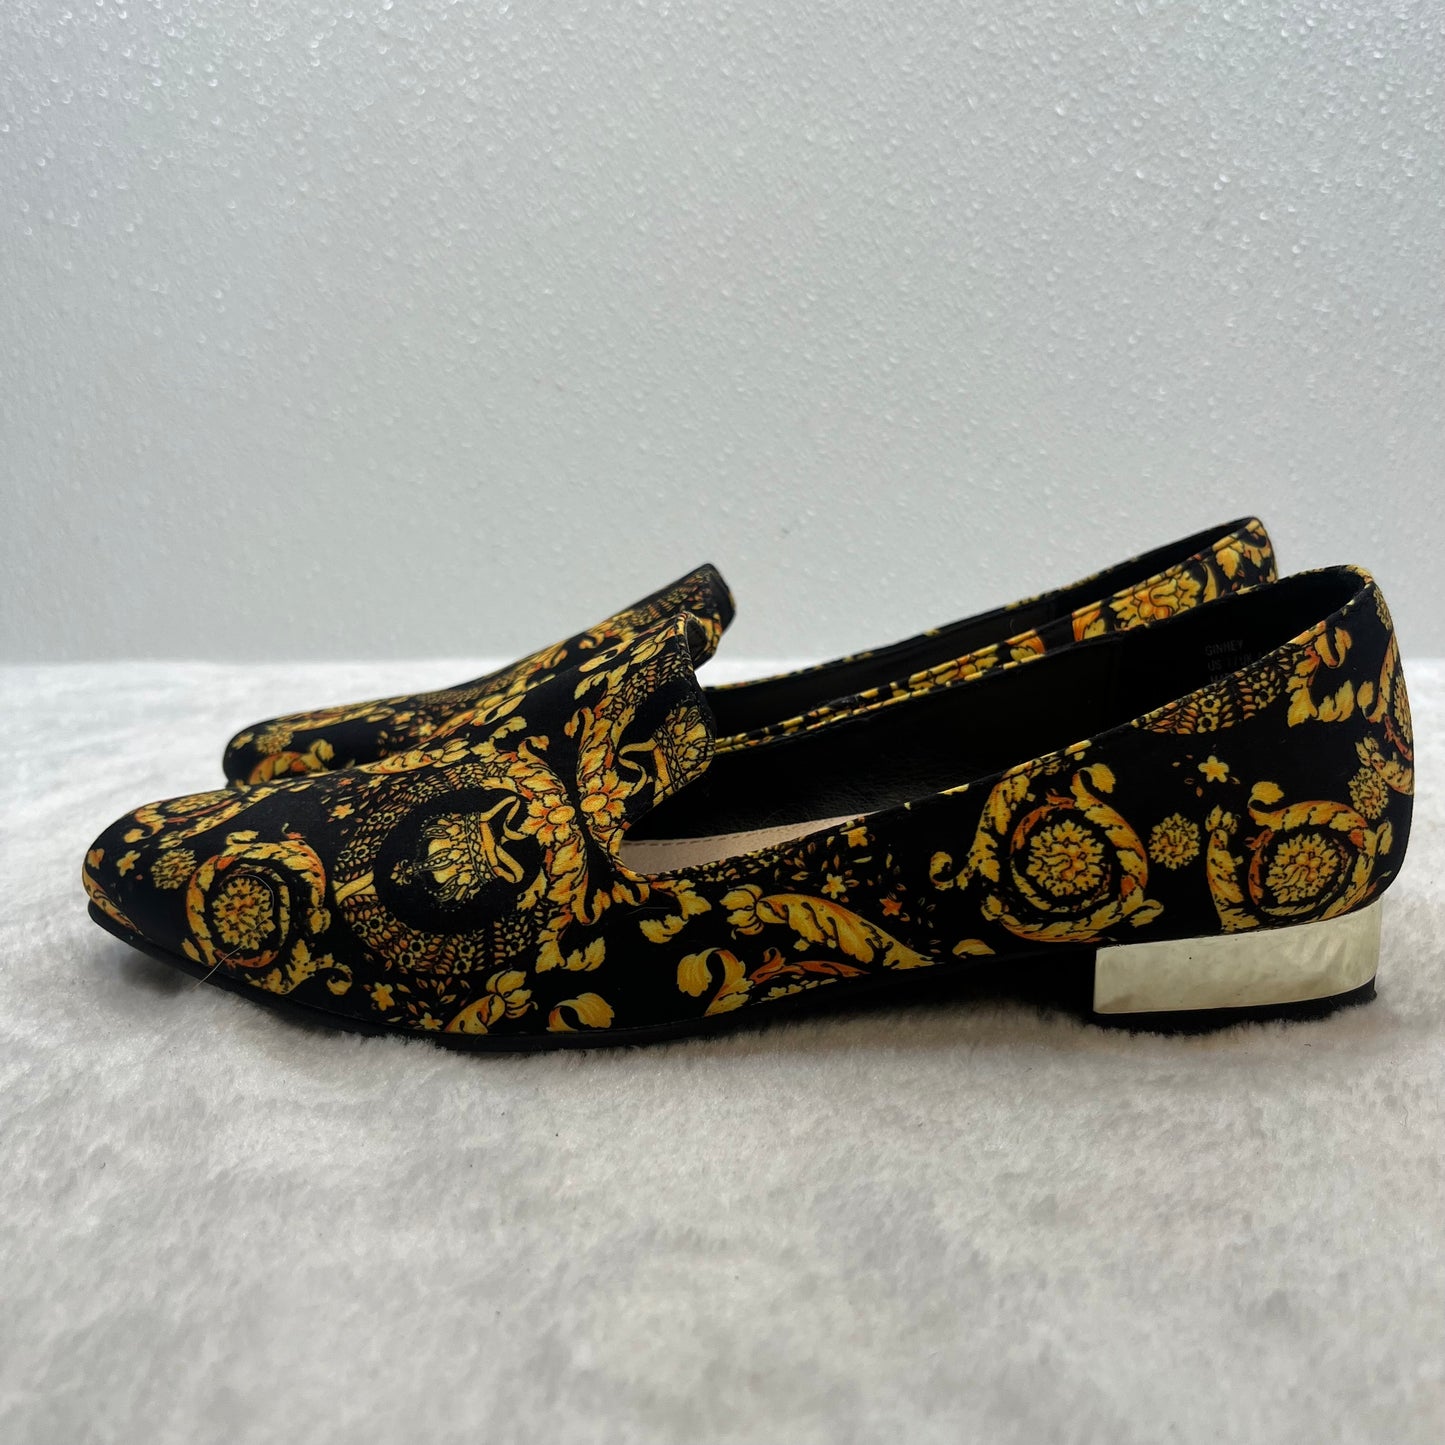 Shoes Flats Loafer Oxford By Shoedazzle  Size: 7